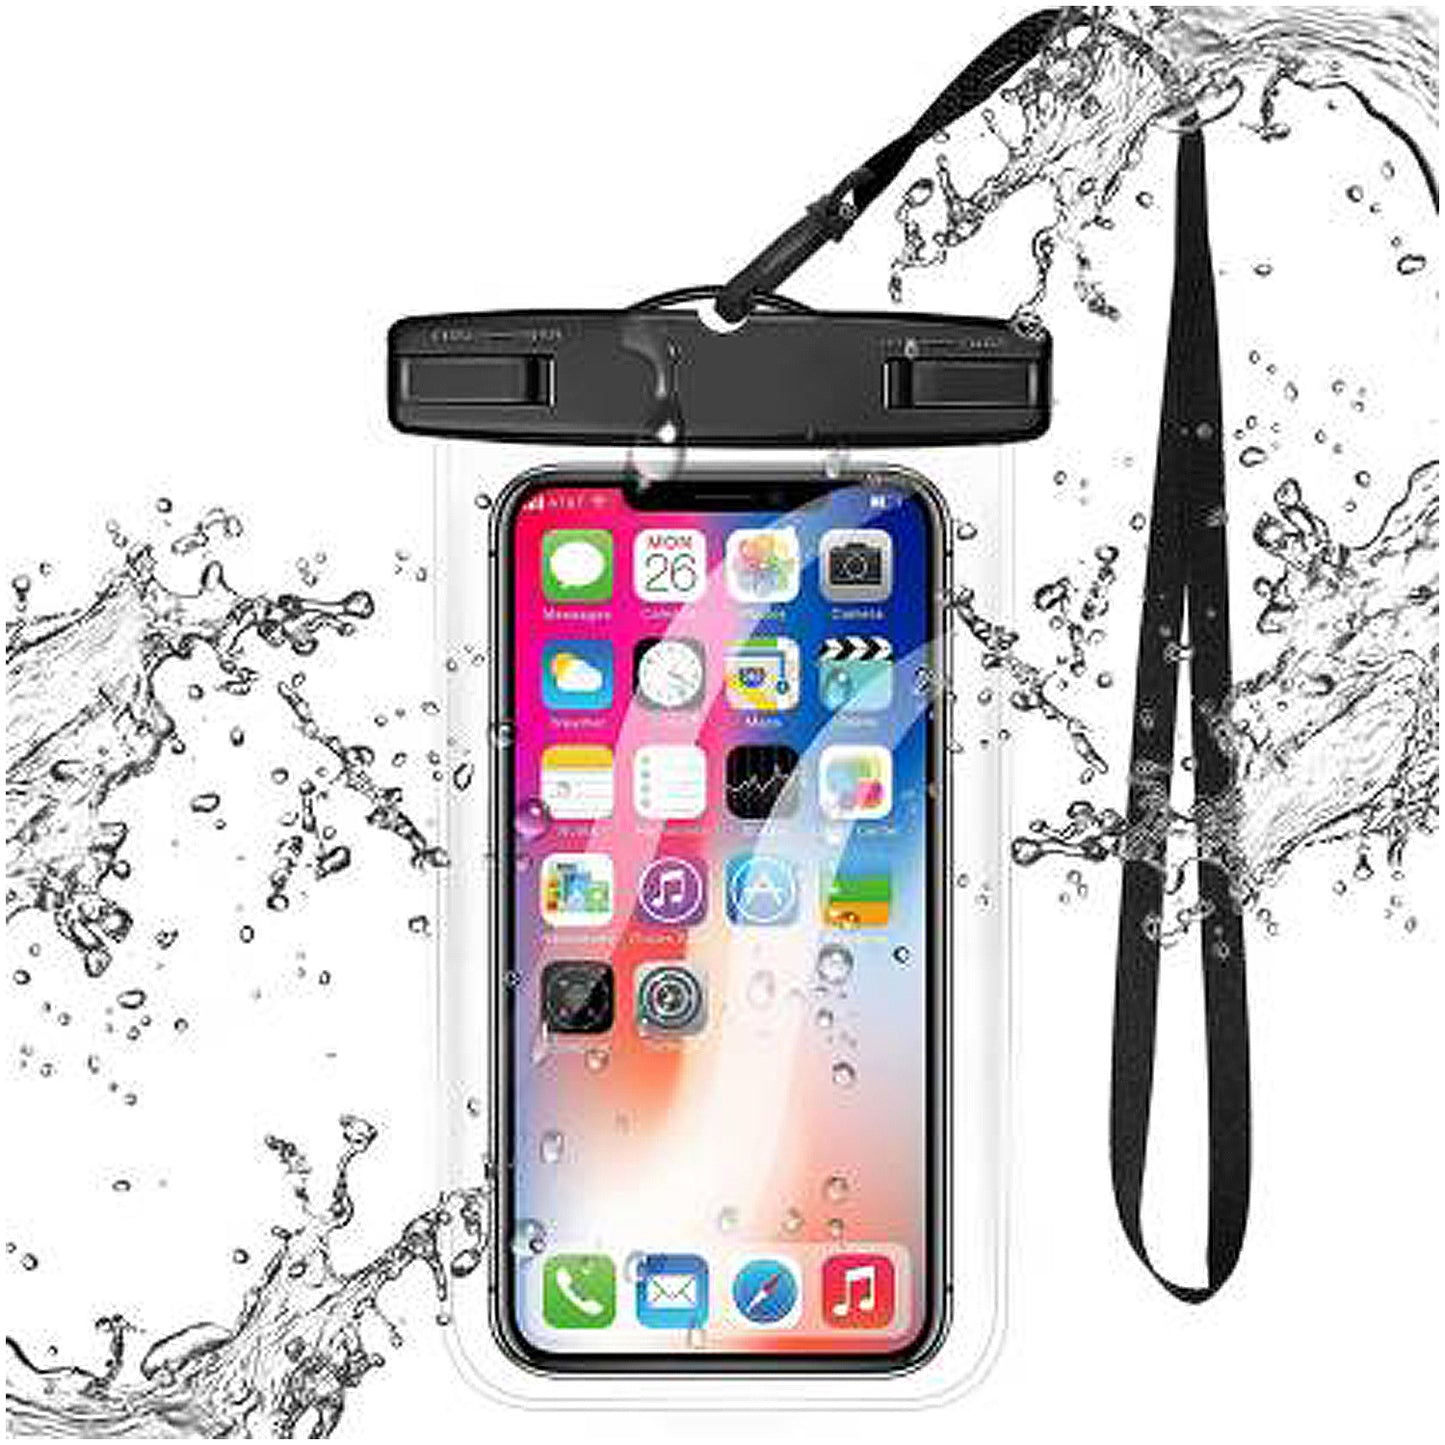 WRADER Pouch for Rain Mobile Touch Sensitive Waterproof Mobile Pouch with Strap, Size upto 6.5 Inches Mobiles